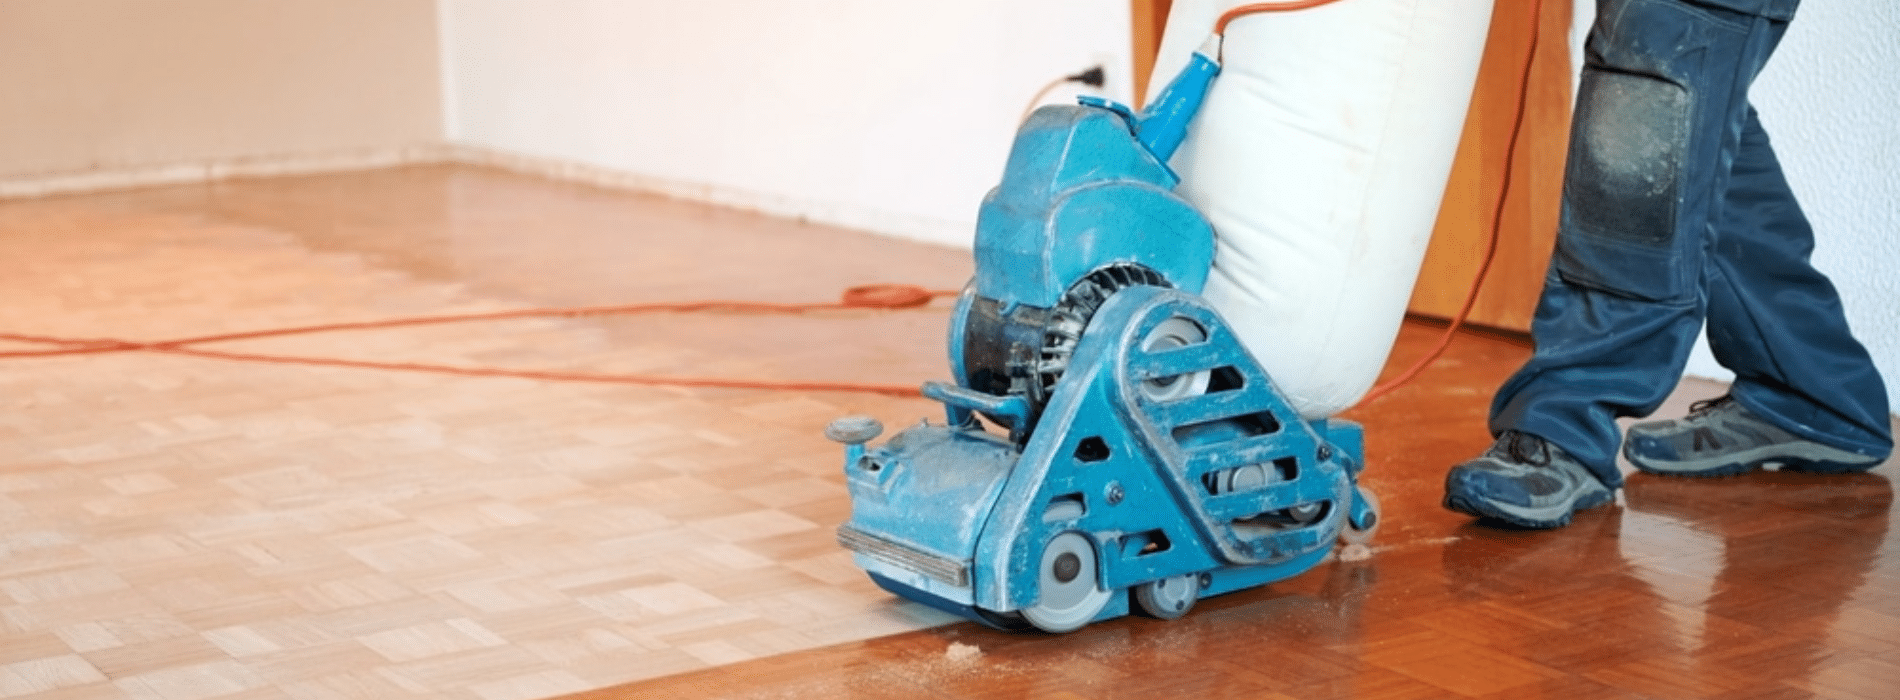 Transform your herringbone floor with Mr Sander® using a powerful Effect 1450 Voltage 230 Bona belt sander. Their dust extraction system with a HEPA filter ensures a clean and efficient result. Trust the experts for professional floor sanding services. Contact us today for a flawless finish!